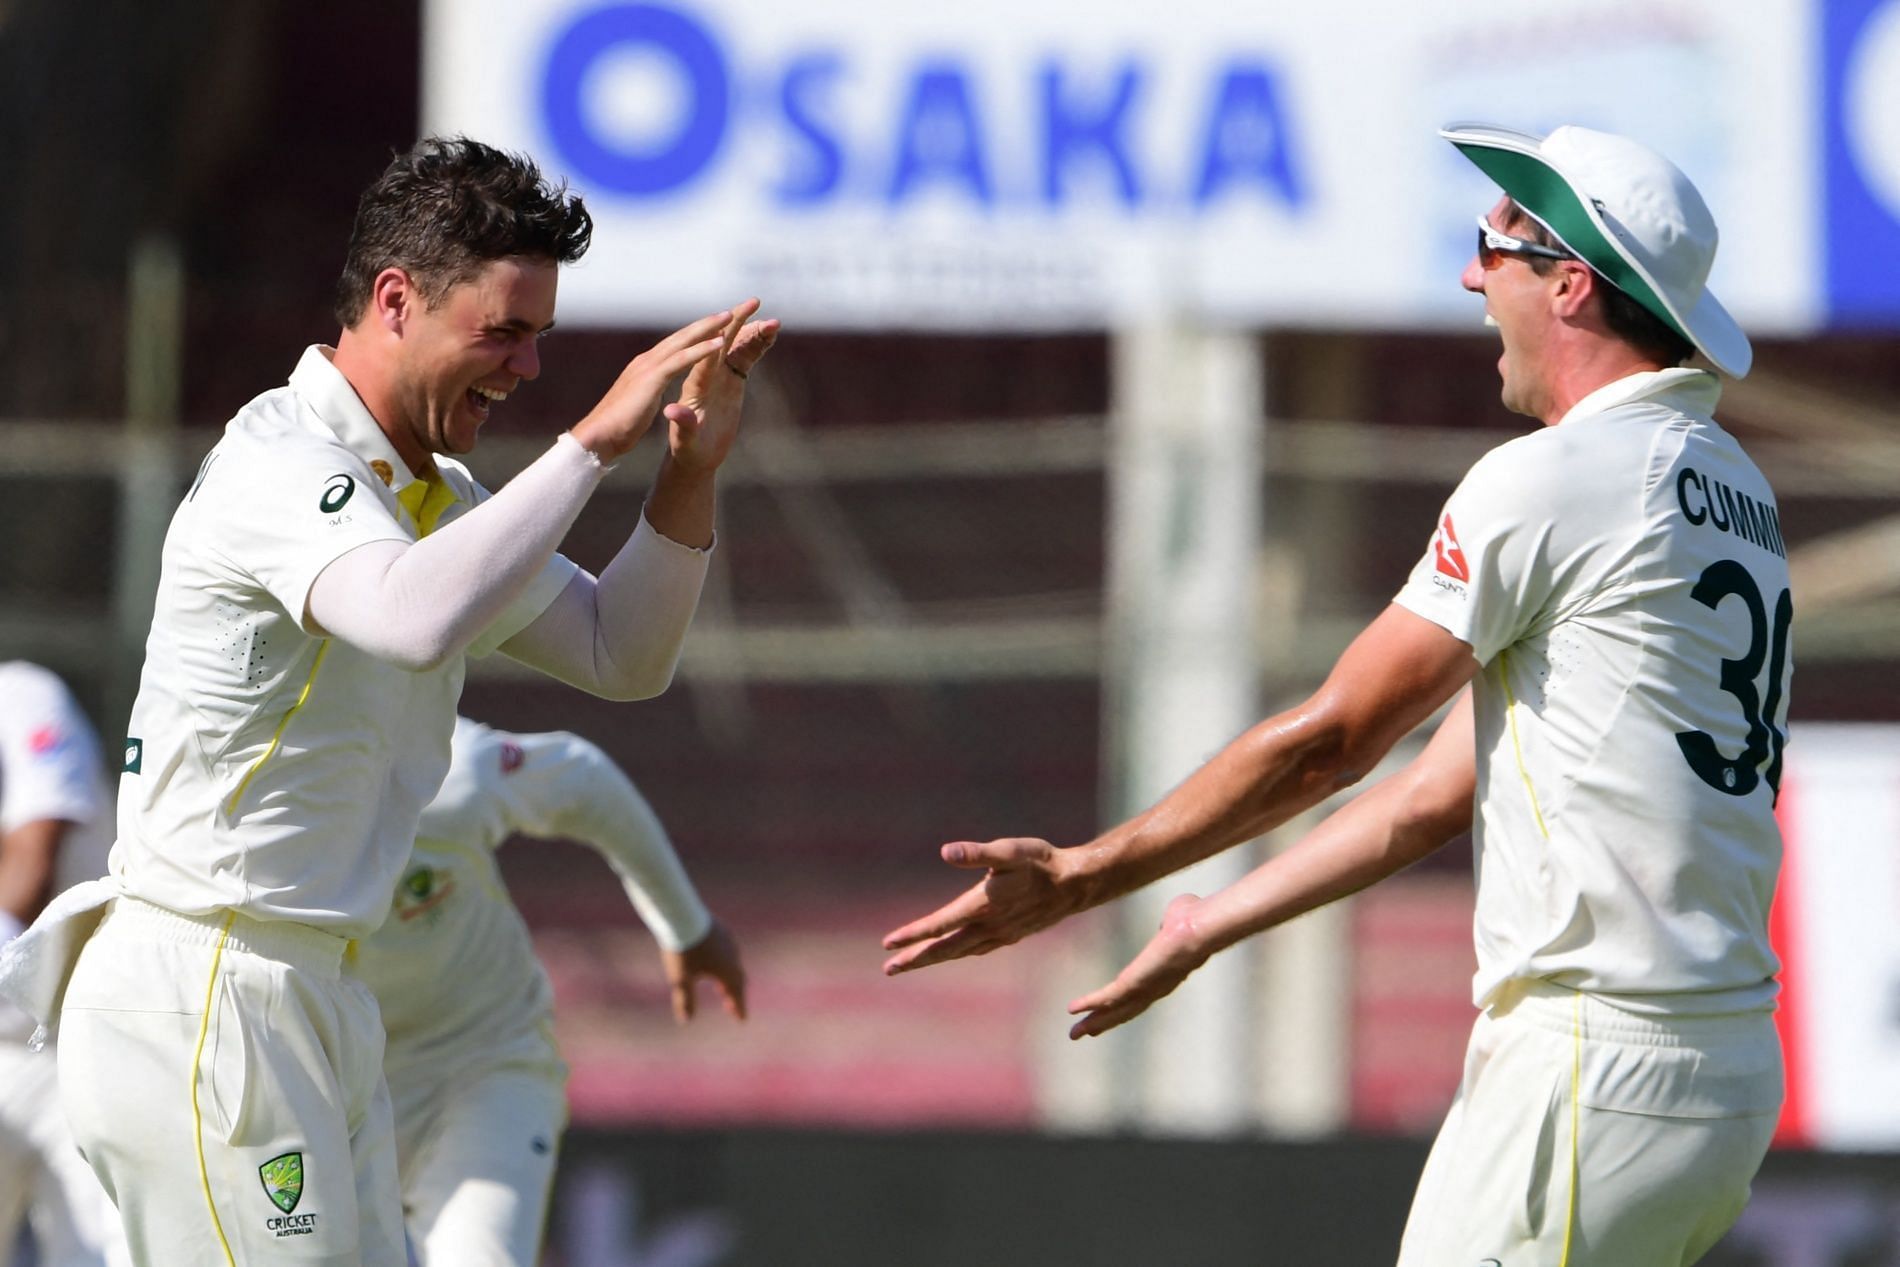 The Aussies celebrate a wicket. Pic: Cricket Australia